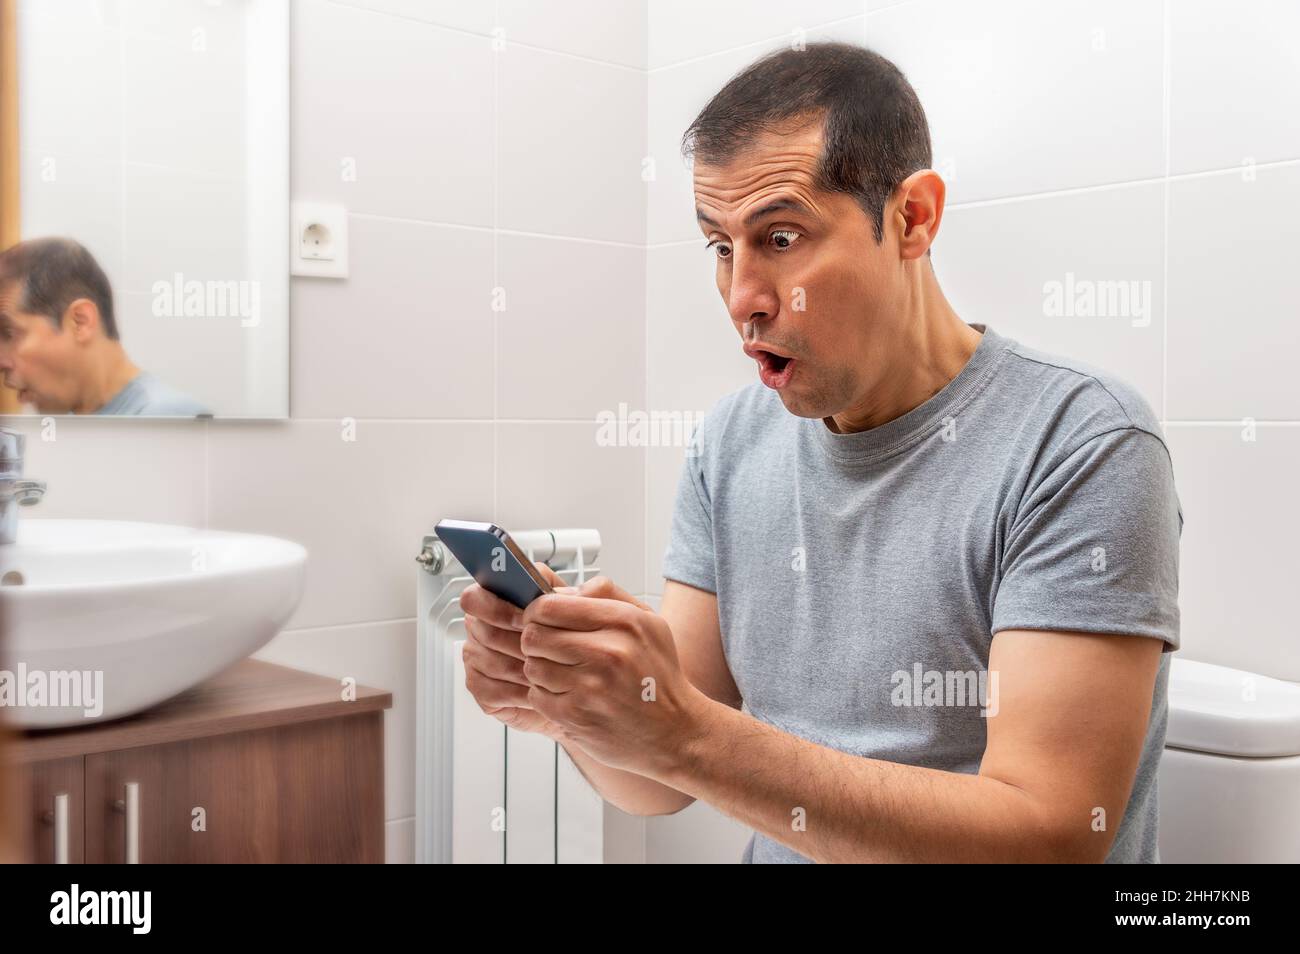 Latin man receiving surprising news on line in a smart phone at the bathroom. Stock Photo